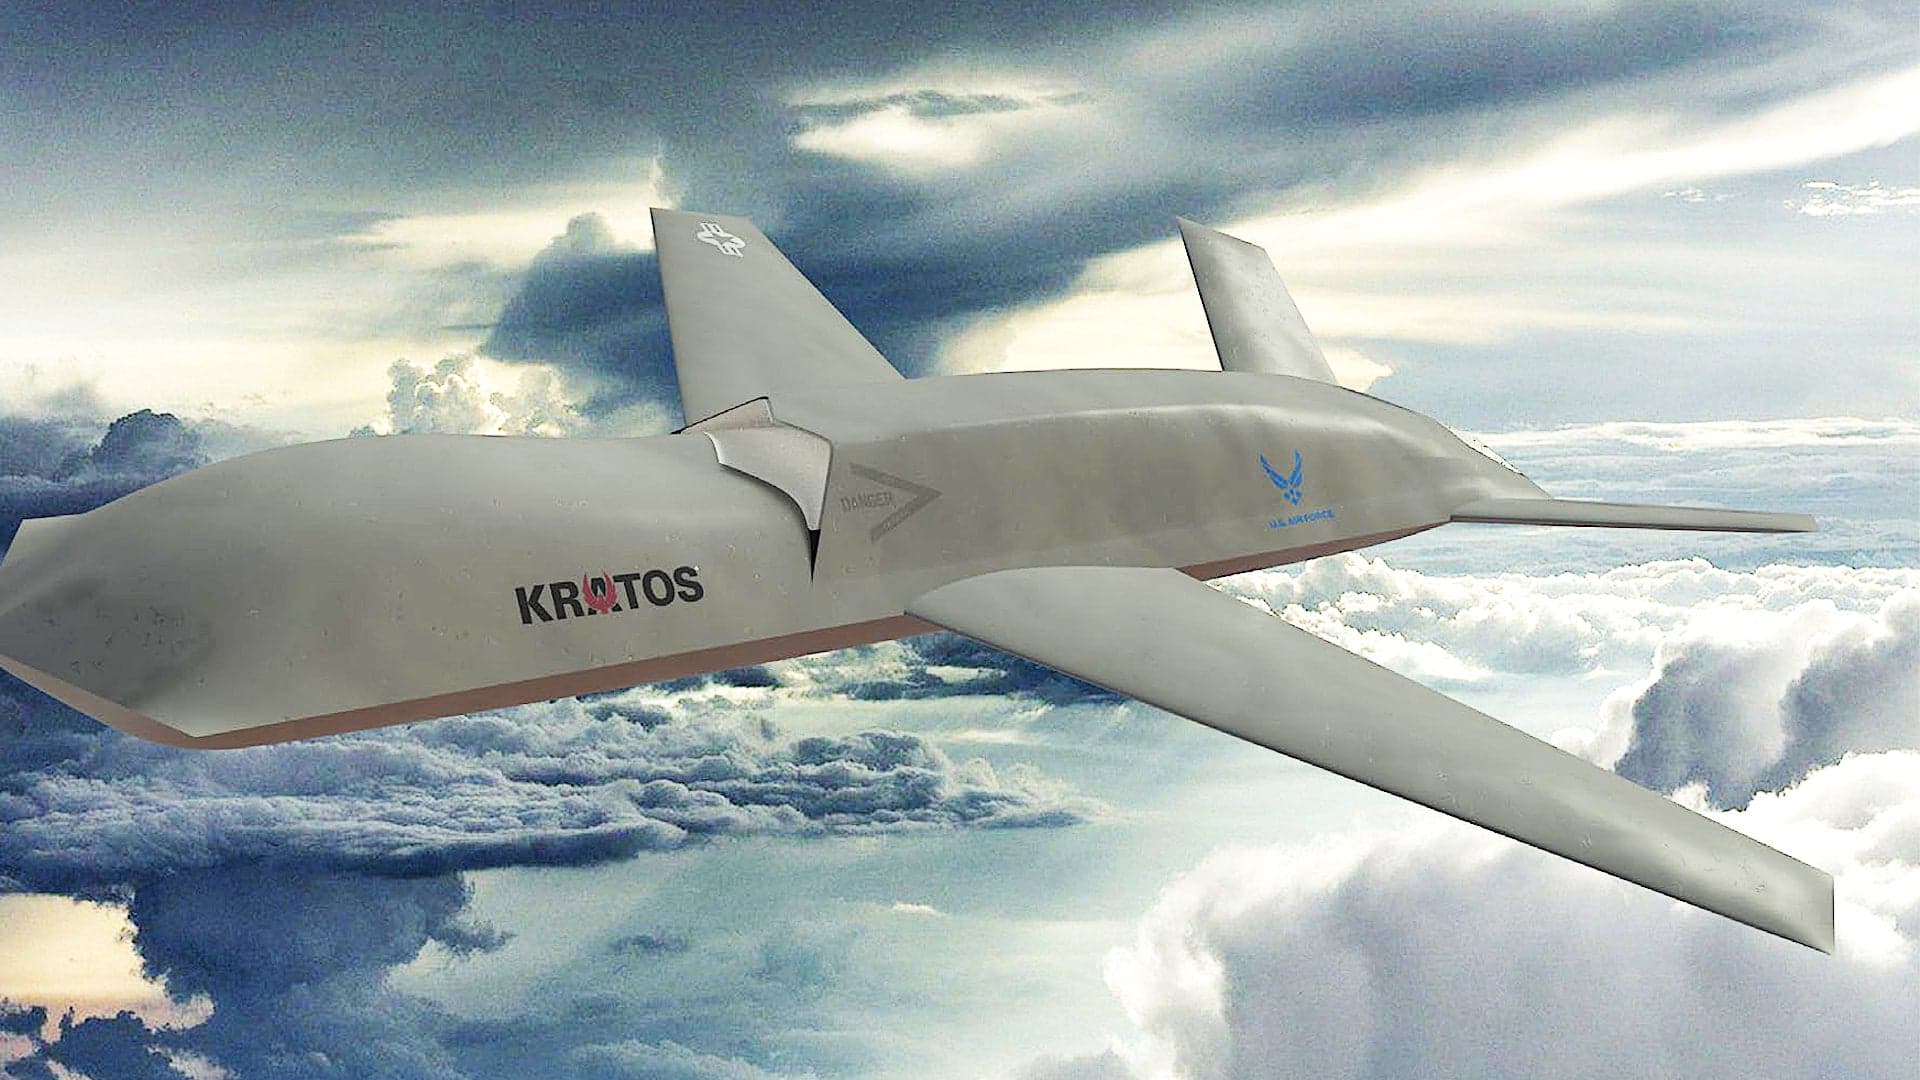 This Is Our First Look At Kratos’ Shadowy New Drone Design For The U.S. Air Force